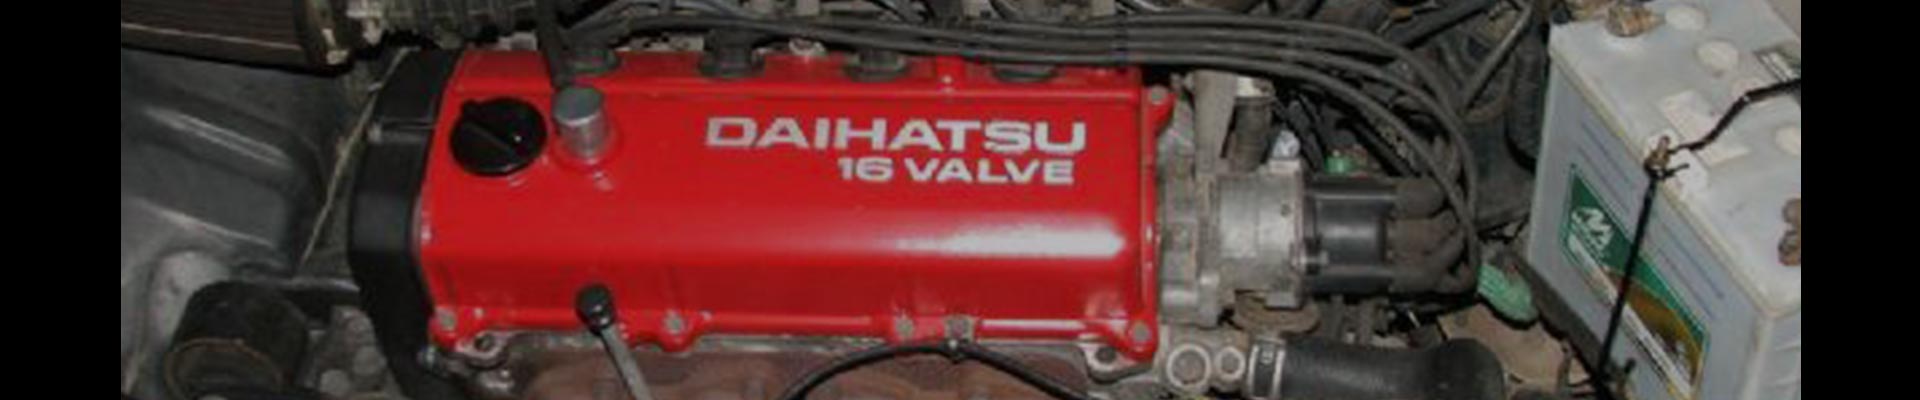 Shop Replacement 1991 Daihatsu Charade Parts with Discounted Price on the Net